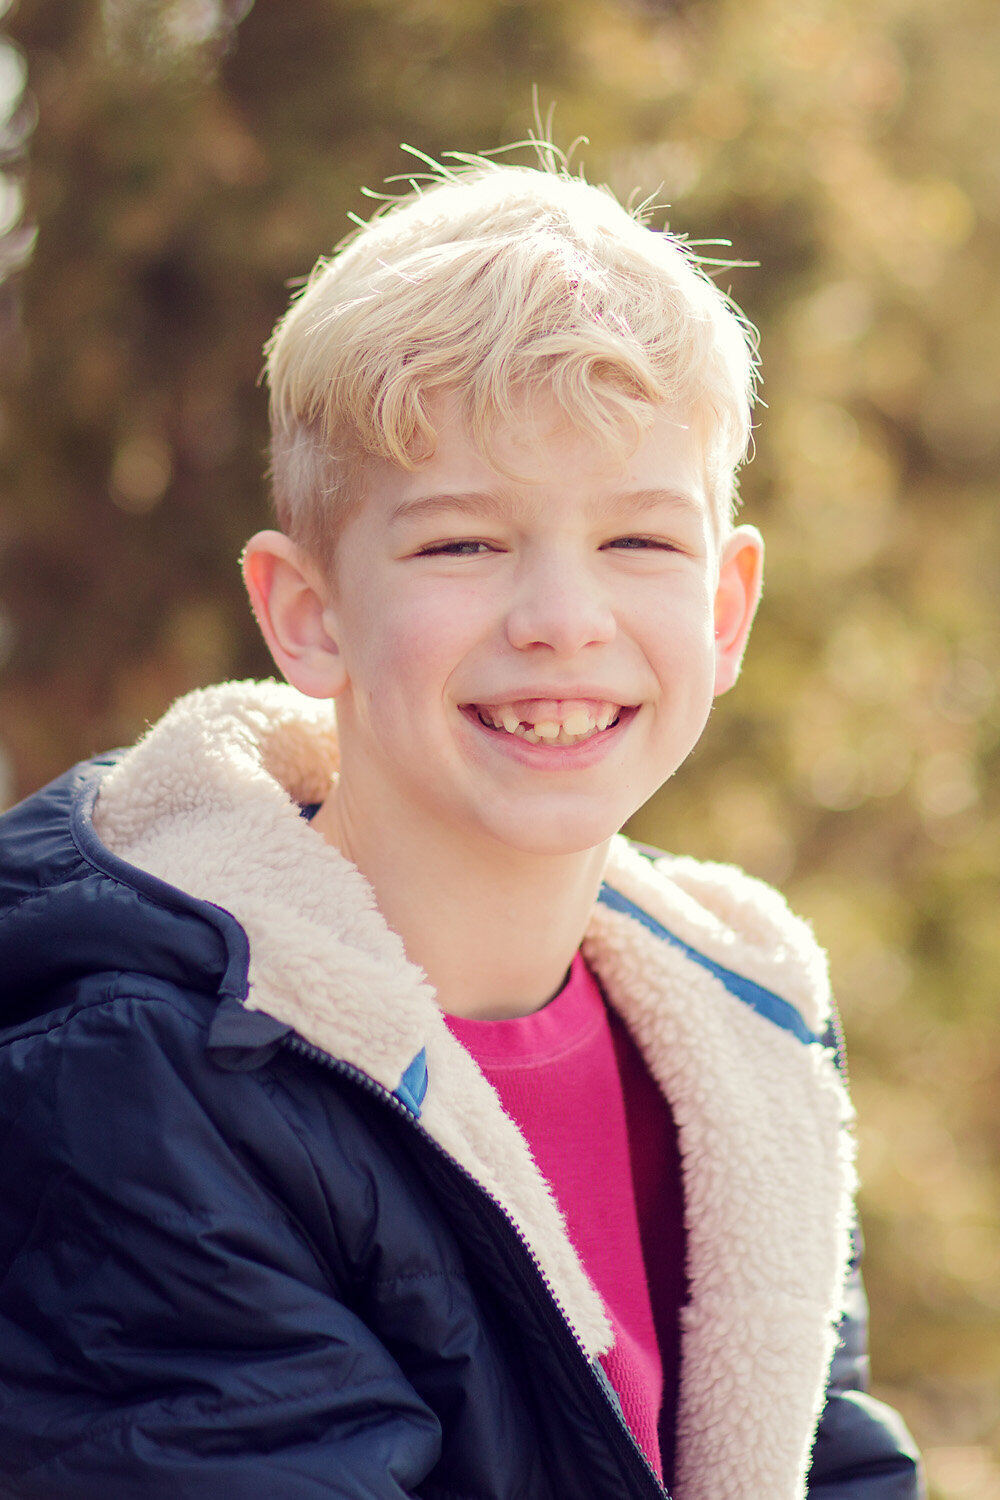 Tween boy with blonde hair smiling at the camera in a blue coat.